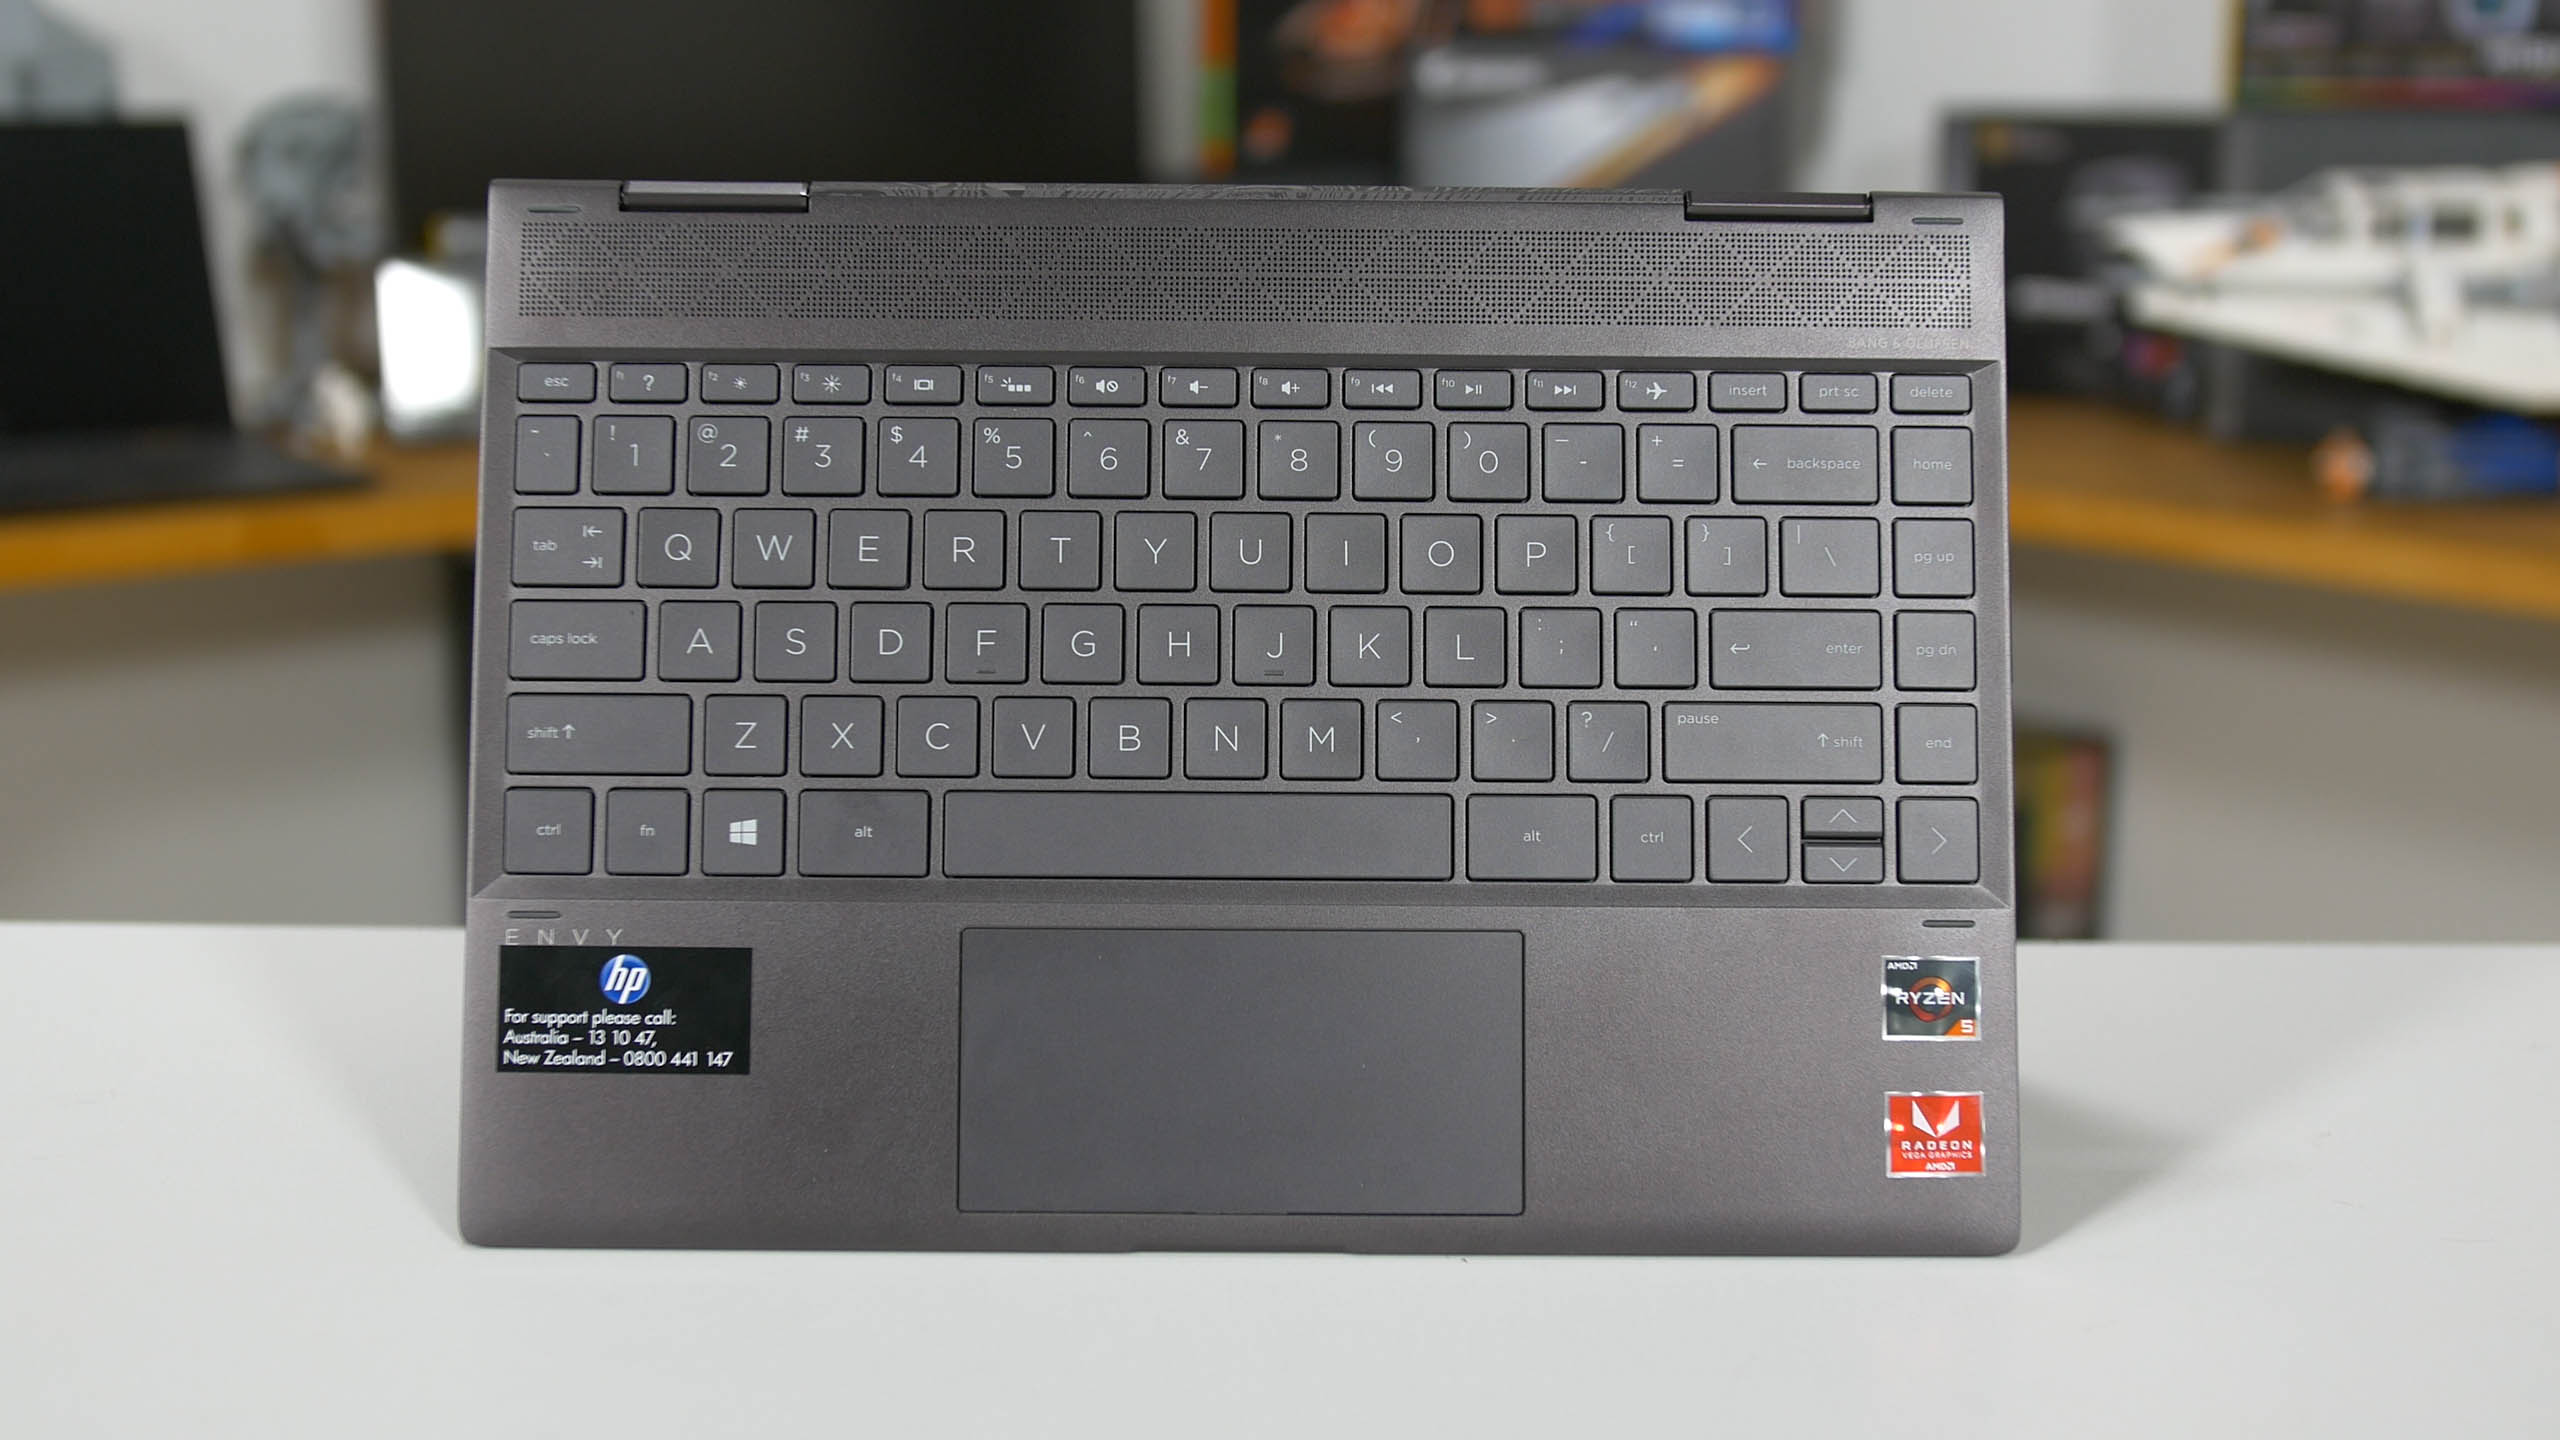 HP Envy x360 13 Review Photo Gallery - TechSpot